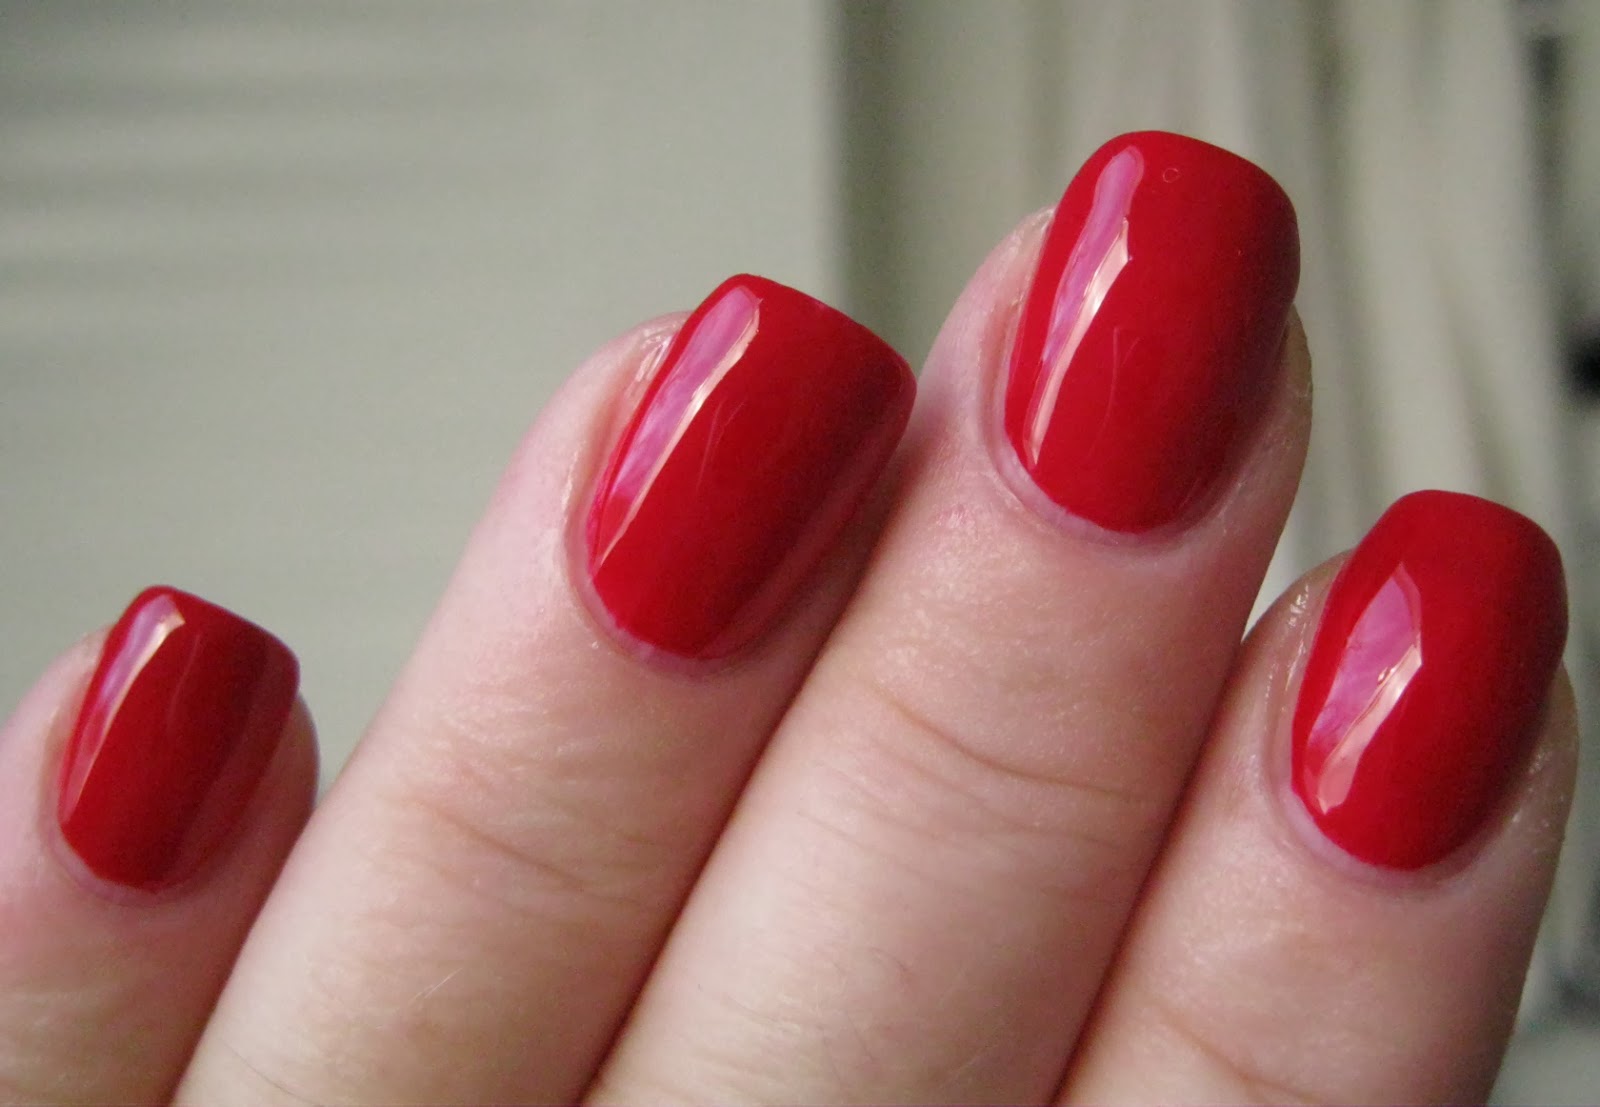 5. "Butter London Come to Bed Red" - wide 5